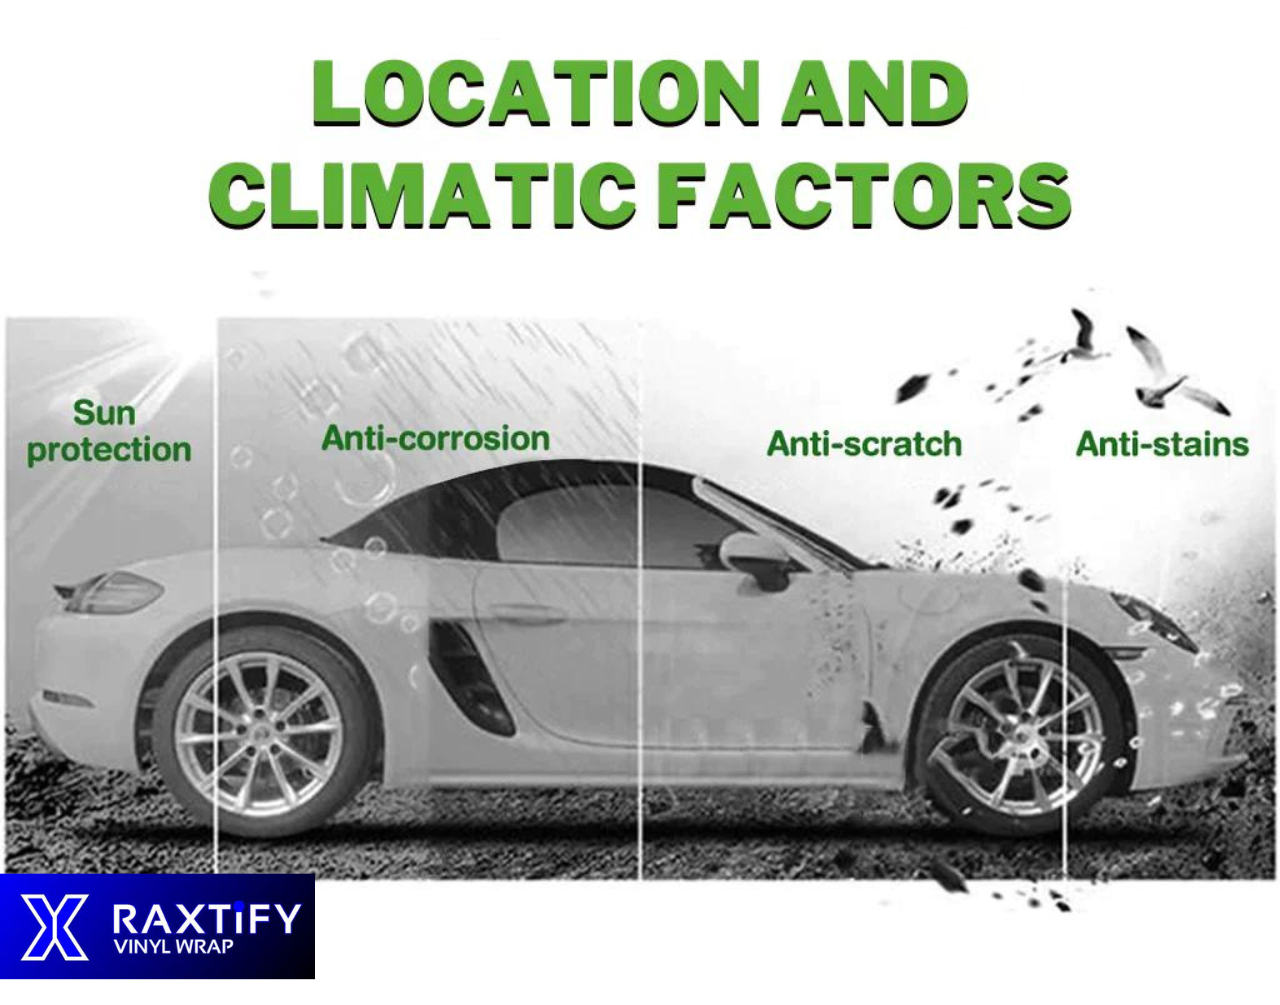 Location and Climate Considerations for Vinyl Car Wraps